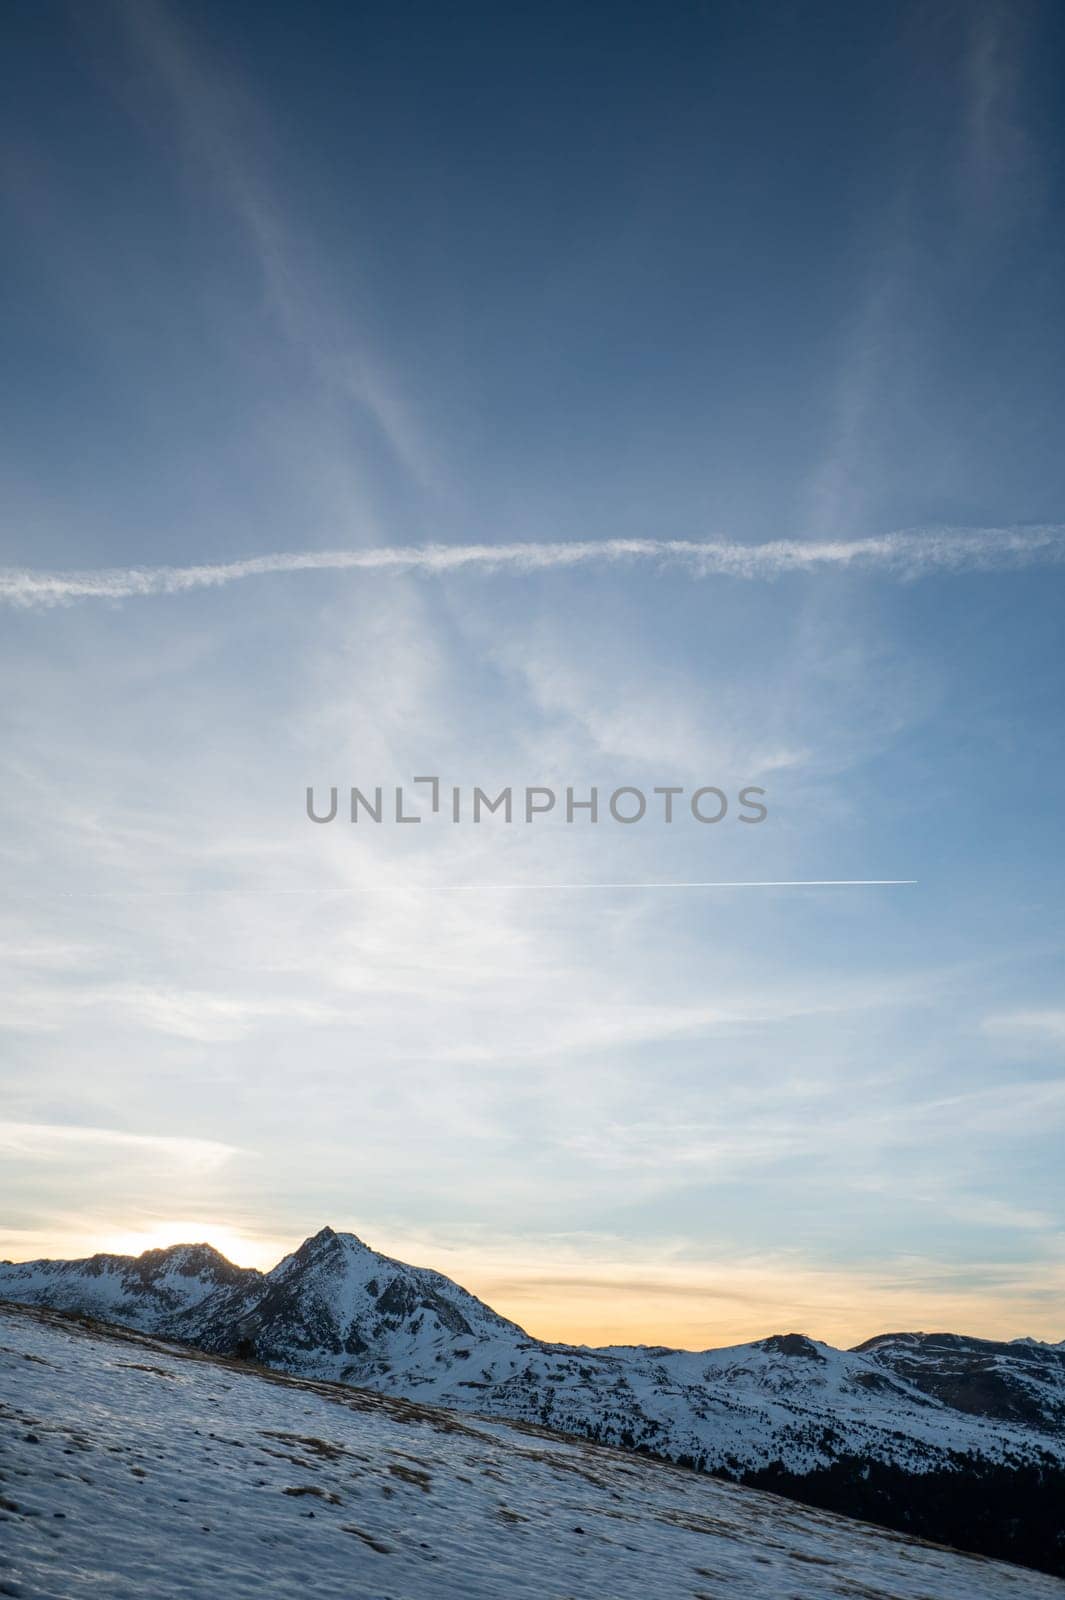 Mountains in the Pyrenees from the Grandvalira ski resort in Andorra by martinscphoto